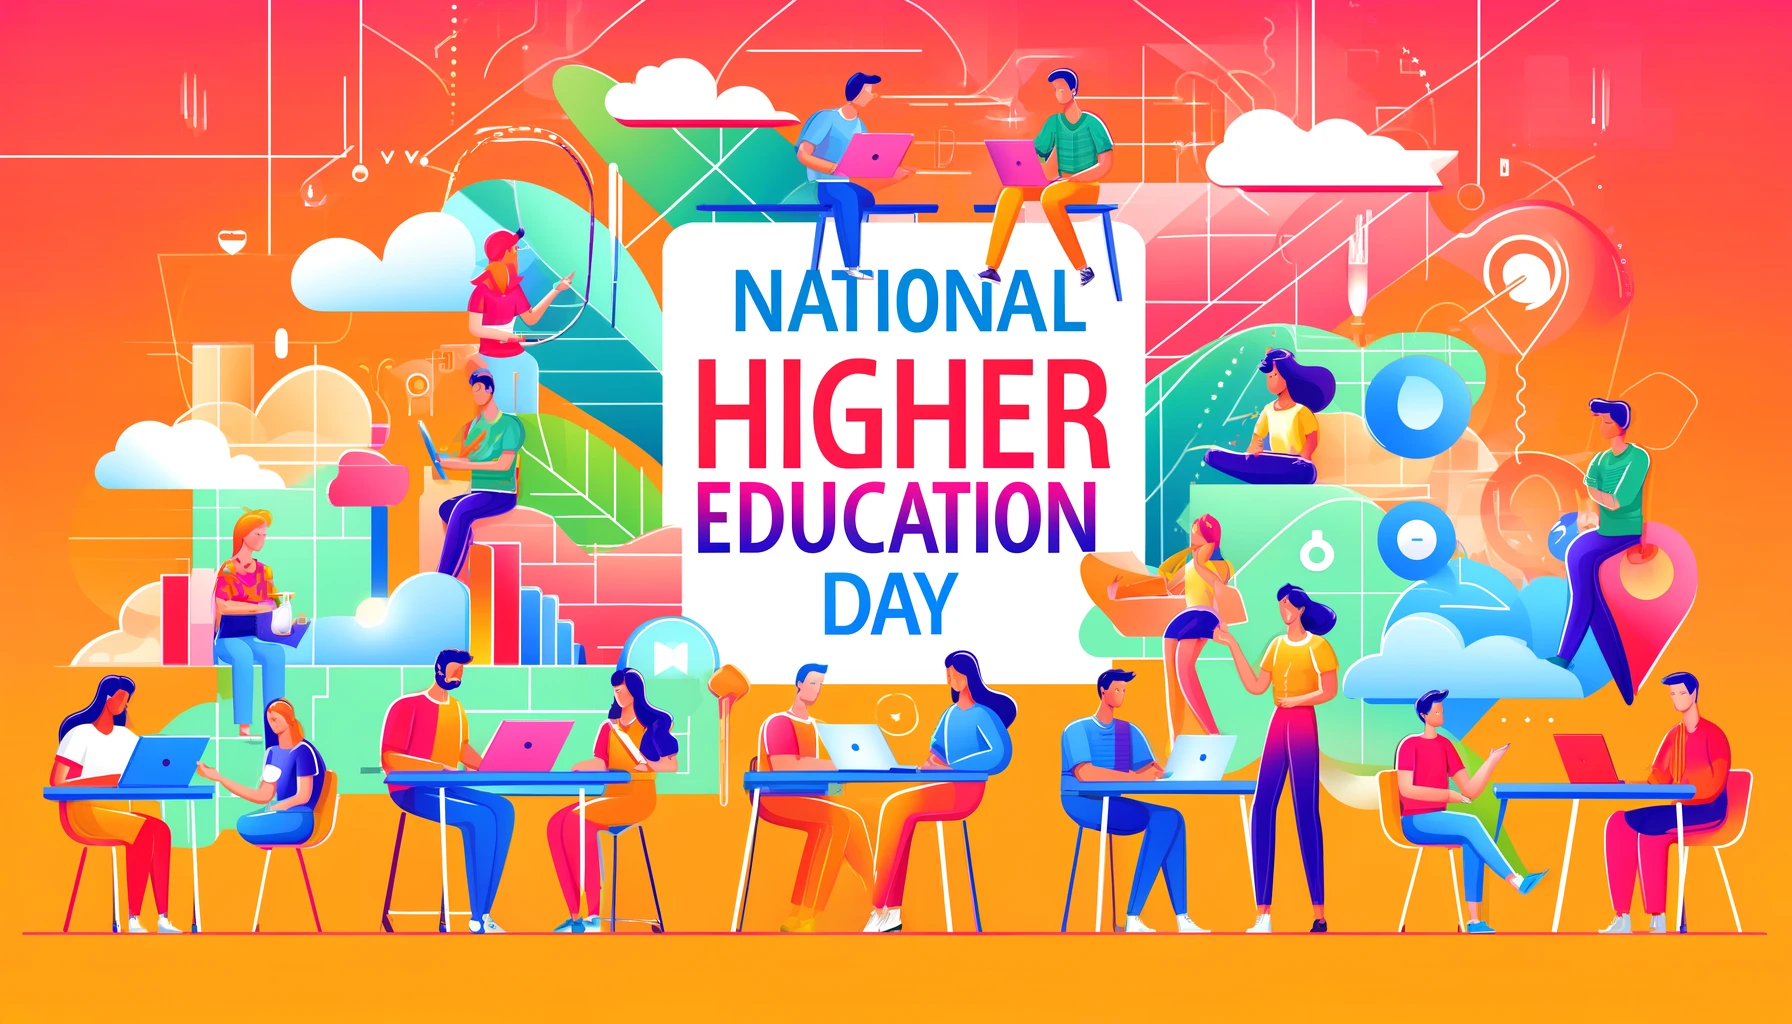 Motivational Greetings for Higher Education Day Celebrations